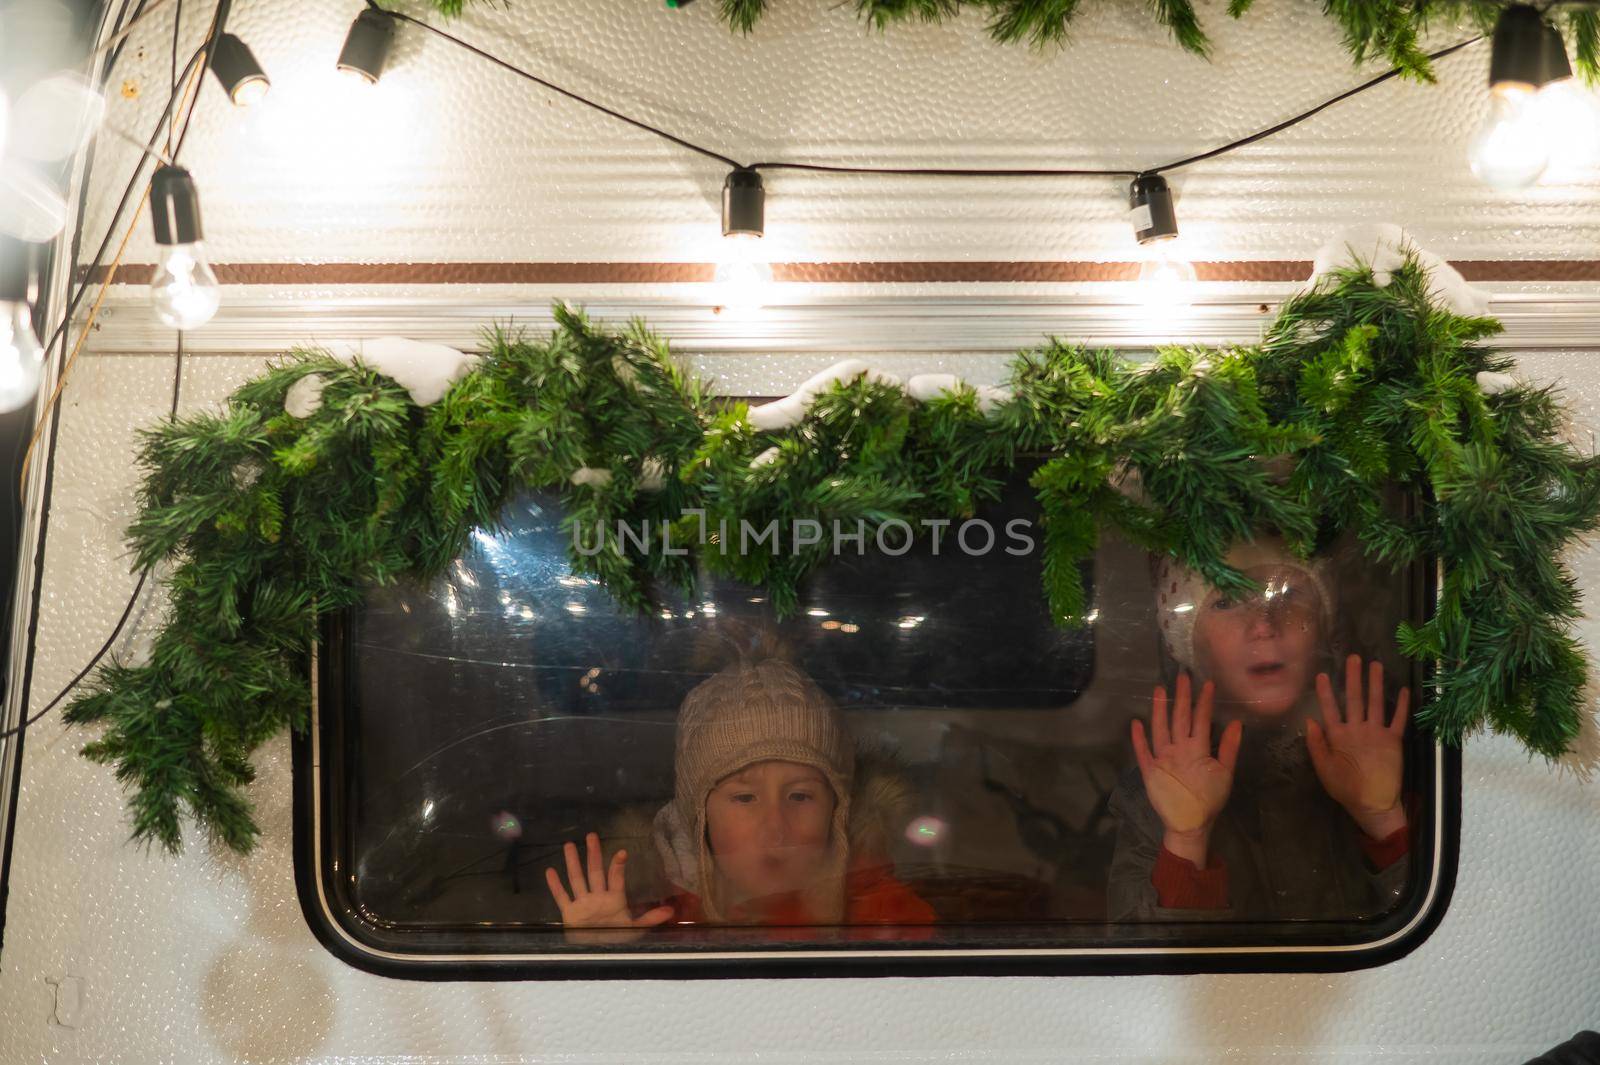 Two boys look out of the window of a Christmas-decorated camper